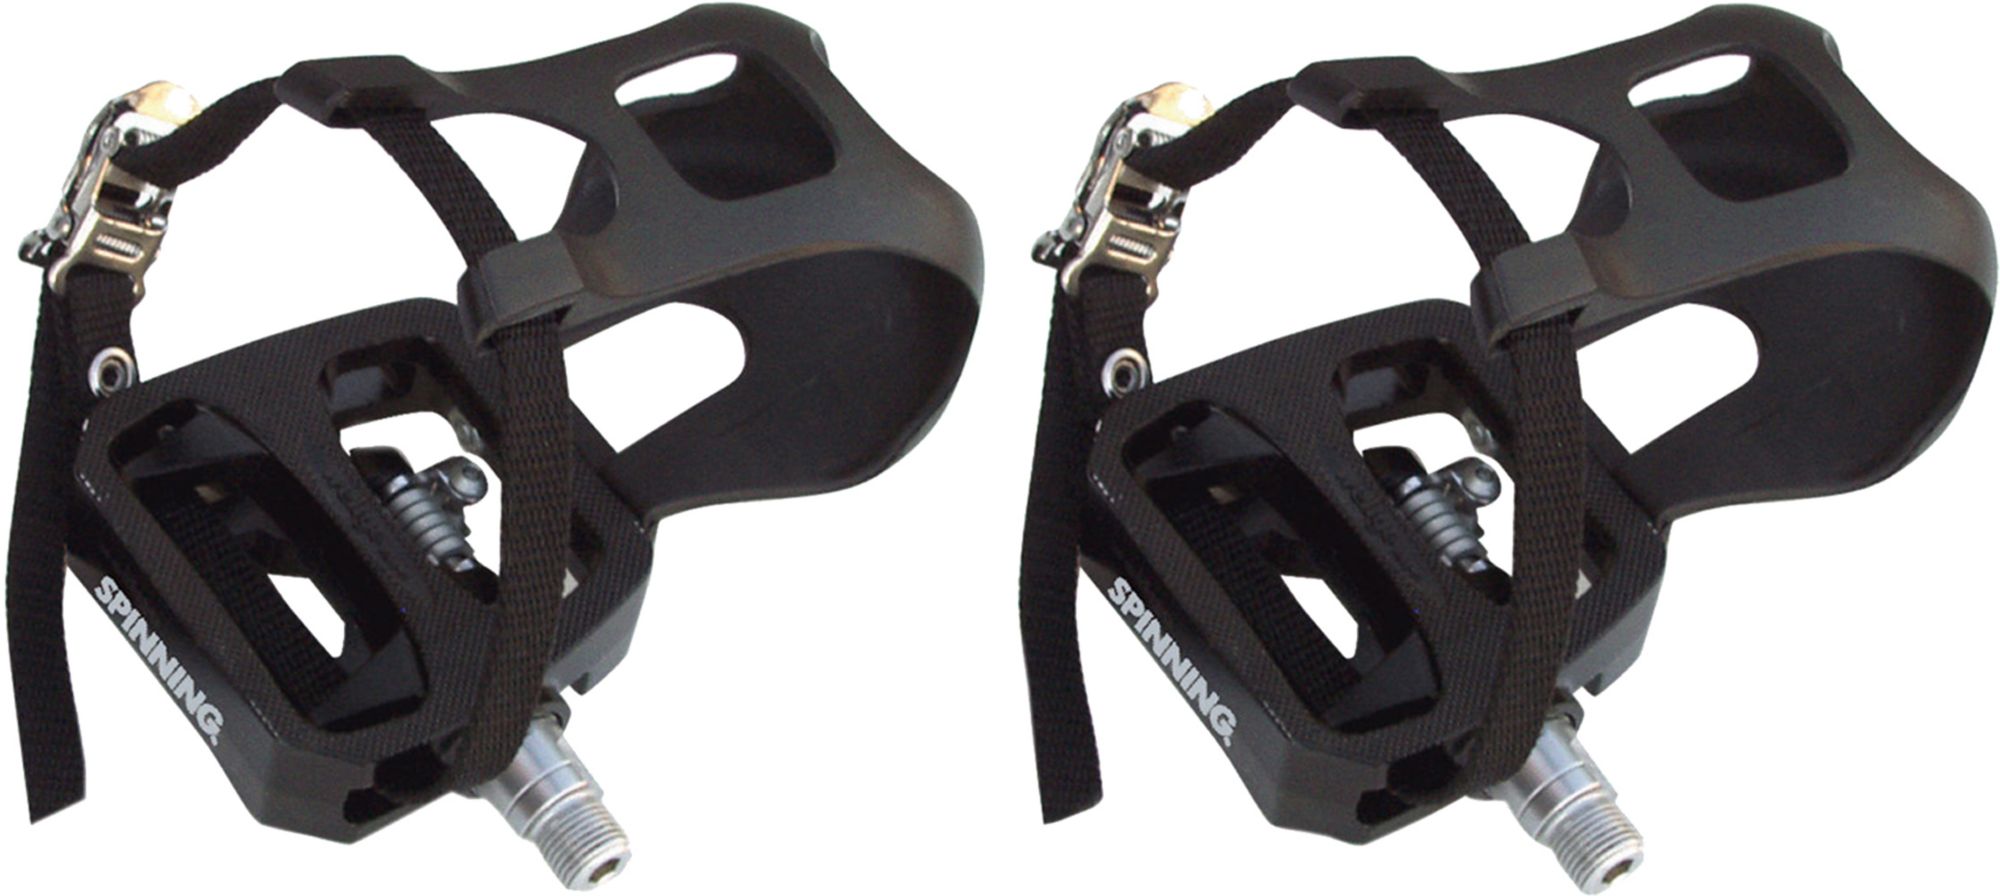 two sided bike pedals